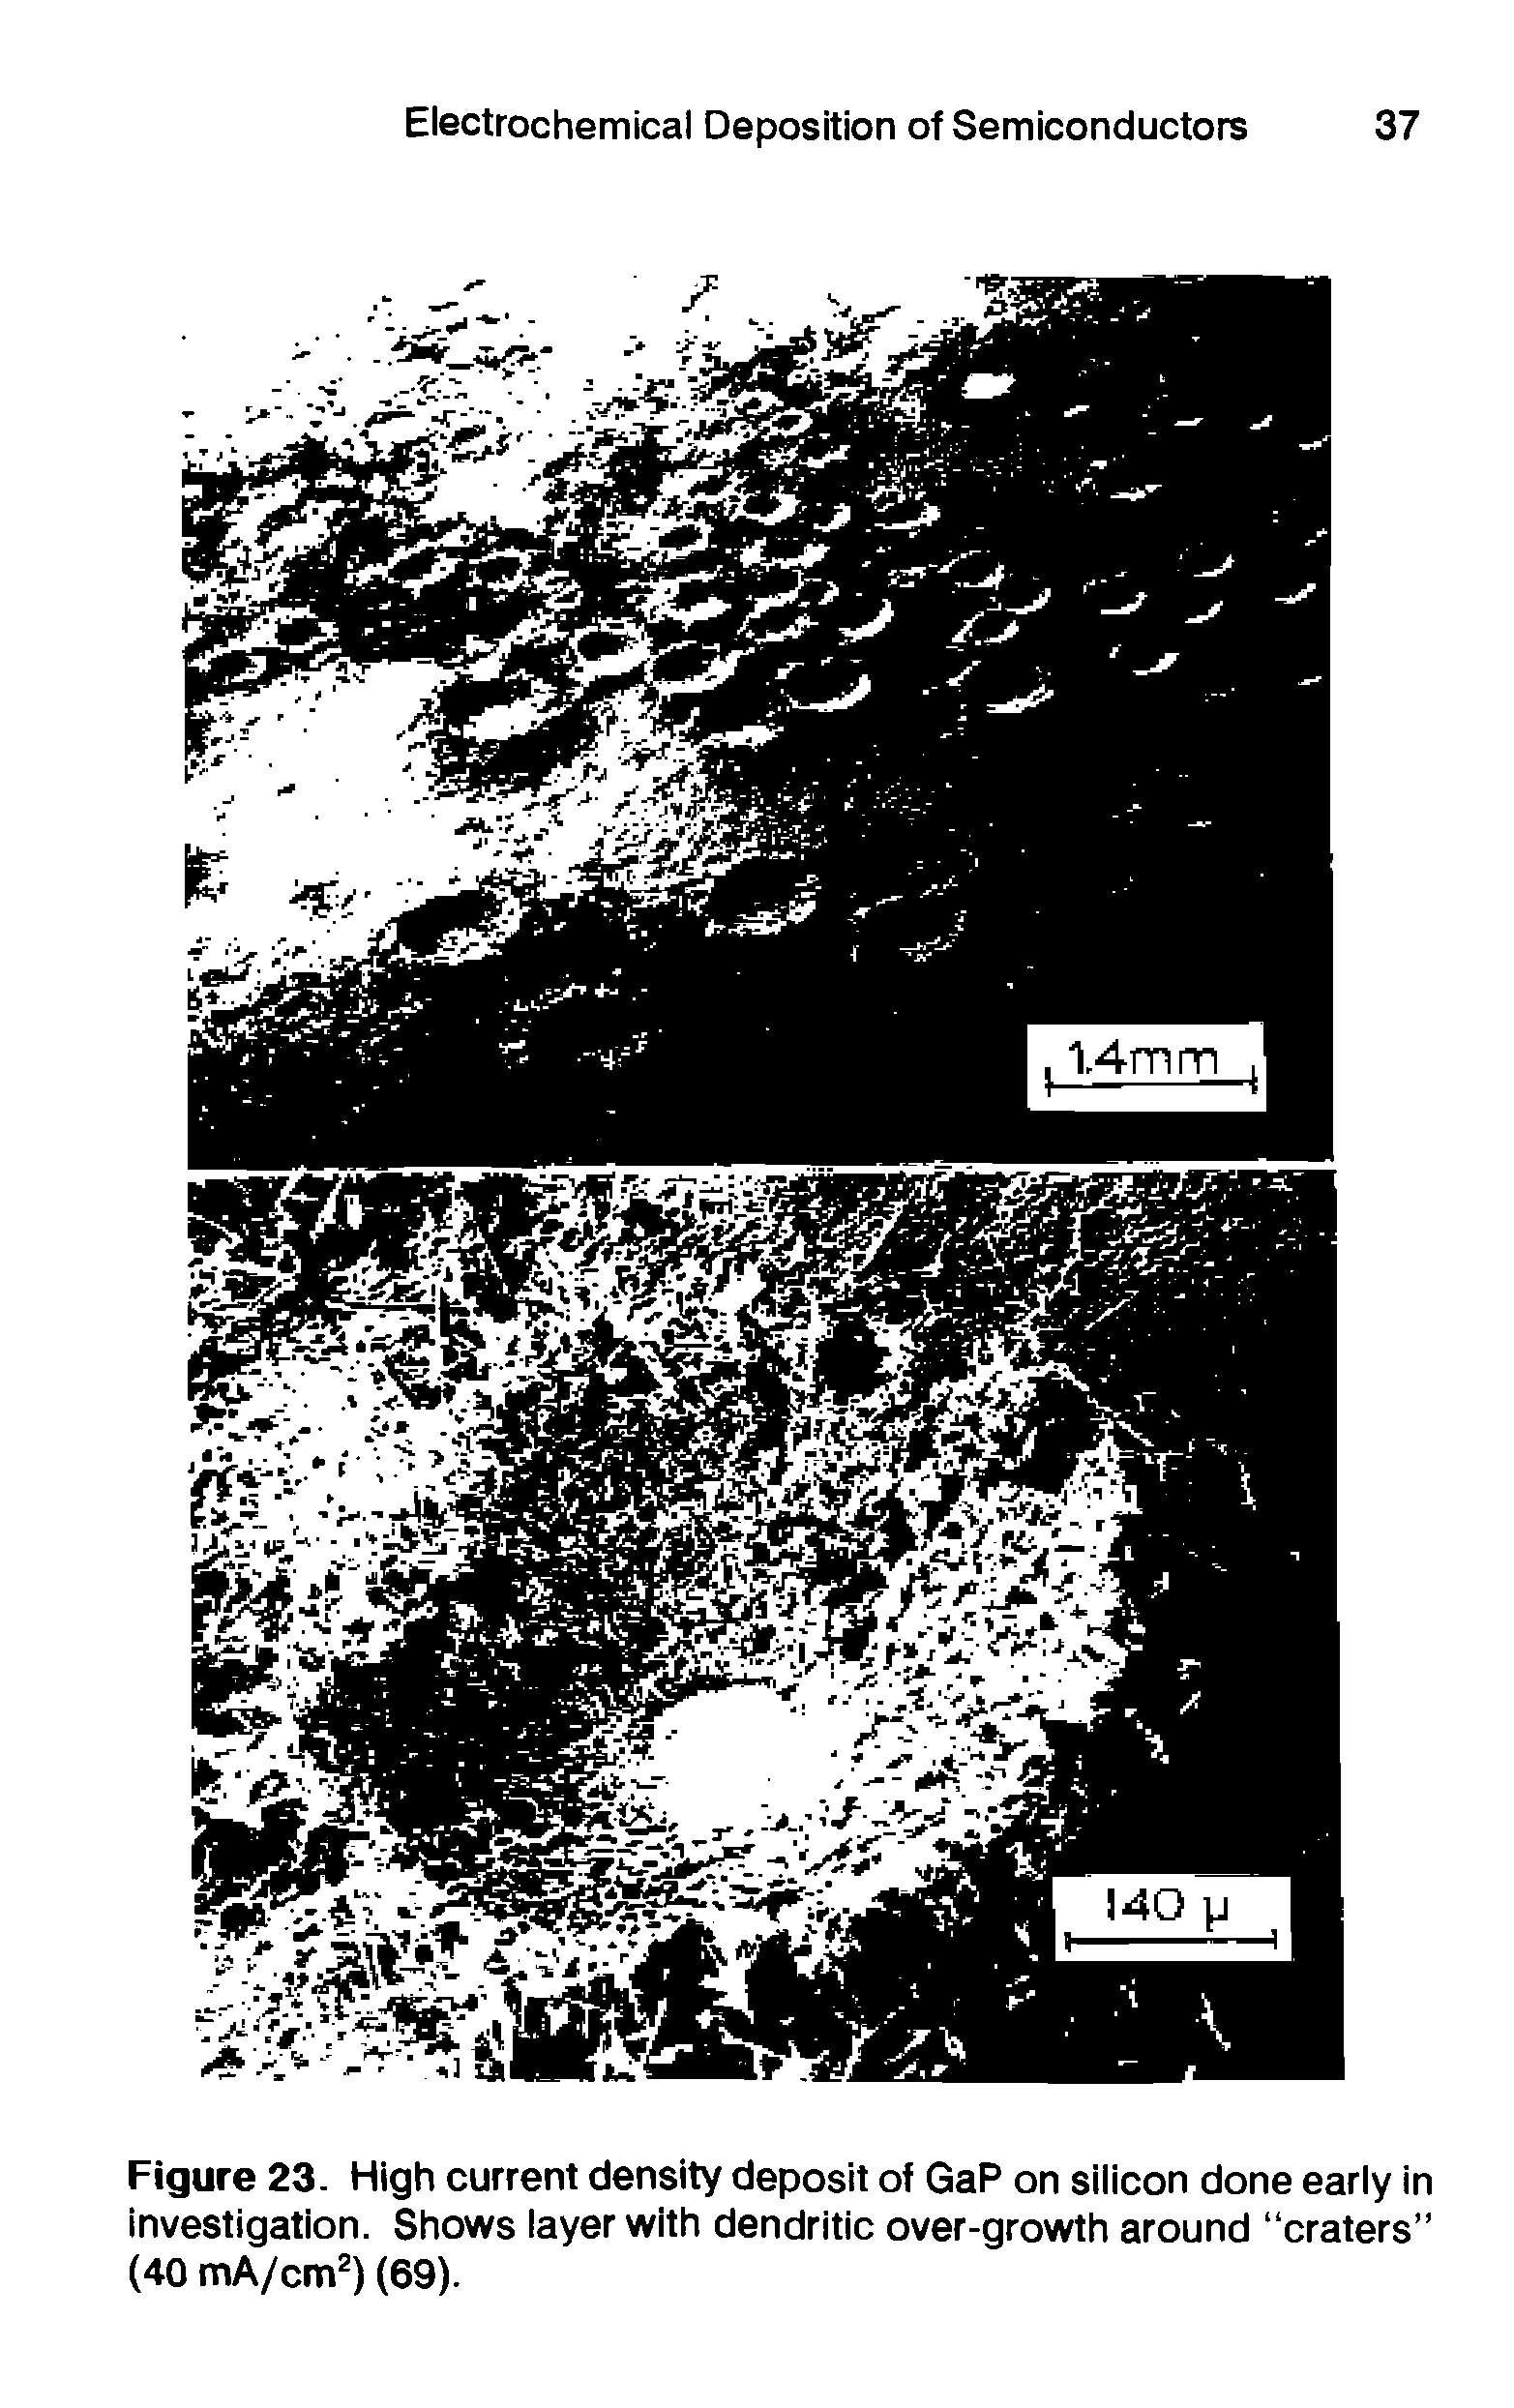 Figure 23. High current density deposit of GaP on silicon done early in investigation. Shows layer with dendritic over-growth around craters (40 mA/cm ) (69).